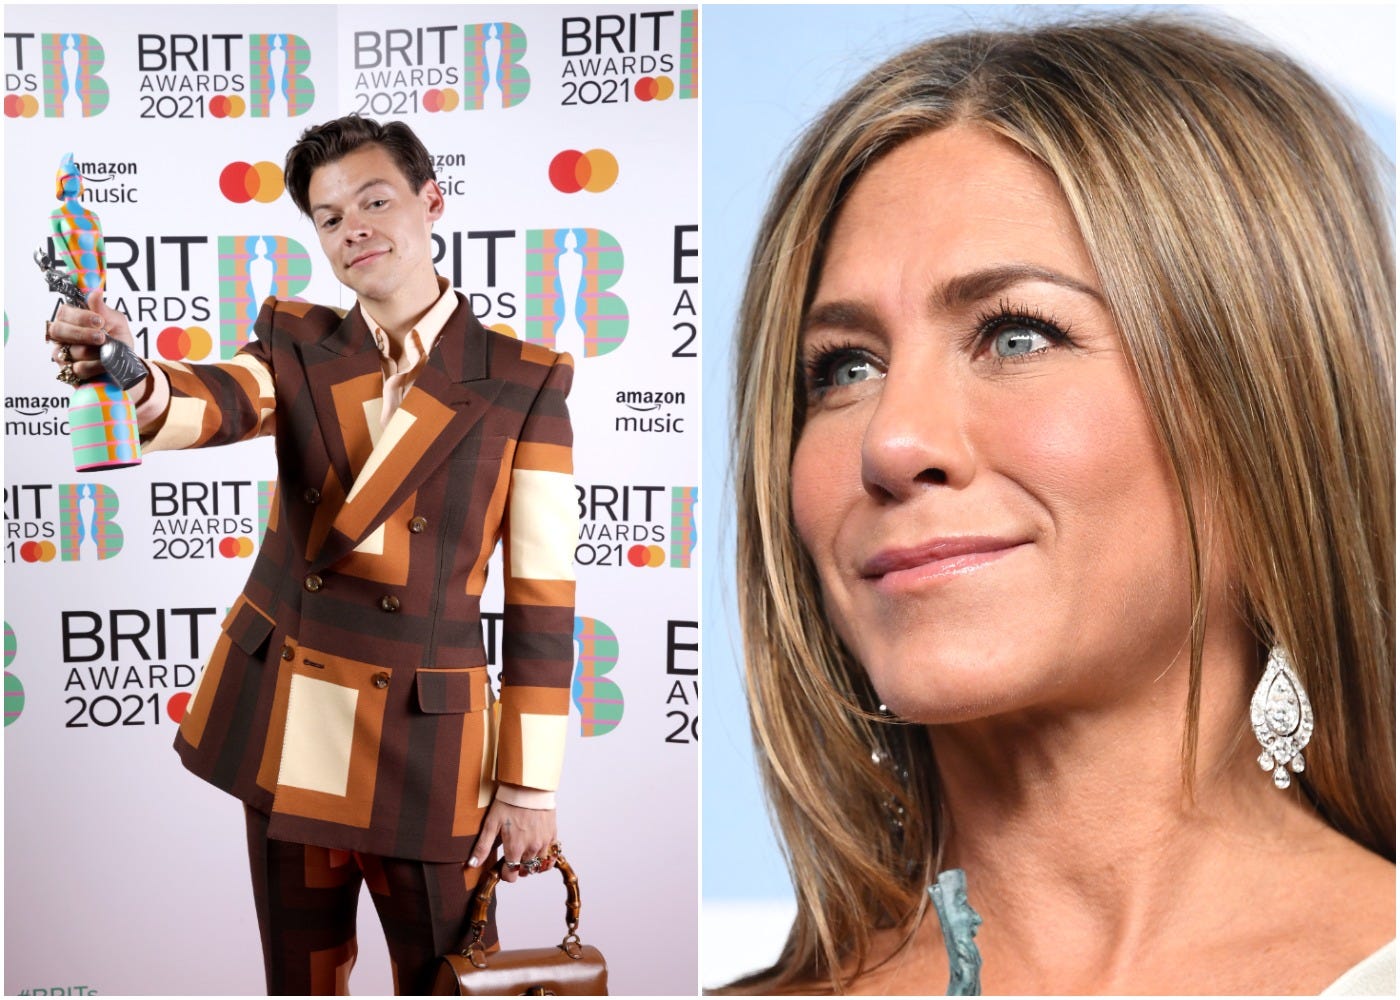 Harry Styles (left) wearing the suit worn by Jennifer Aniston (right) to the 2021 Brit Awards.